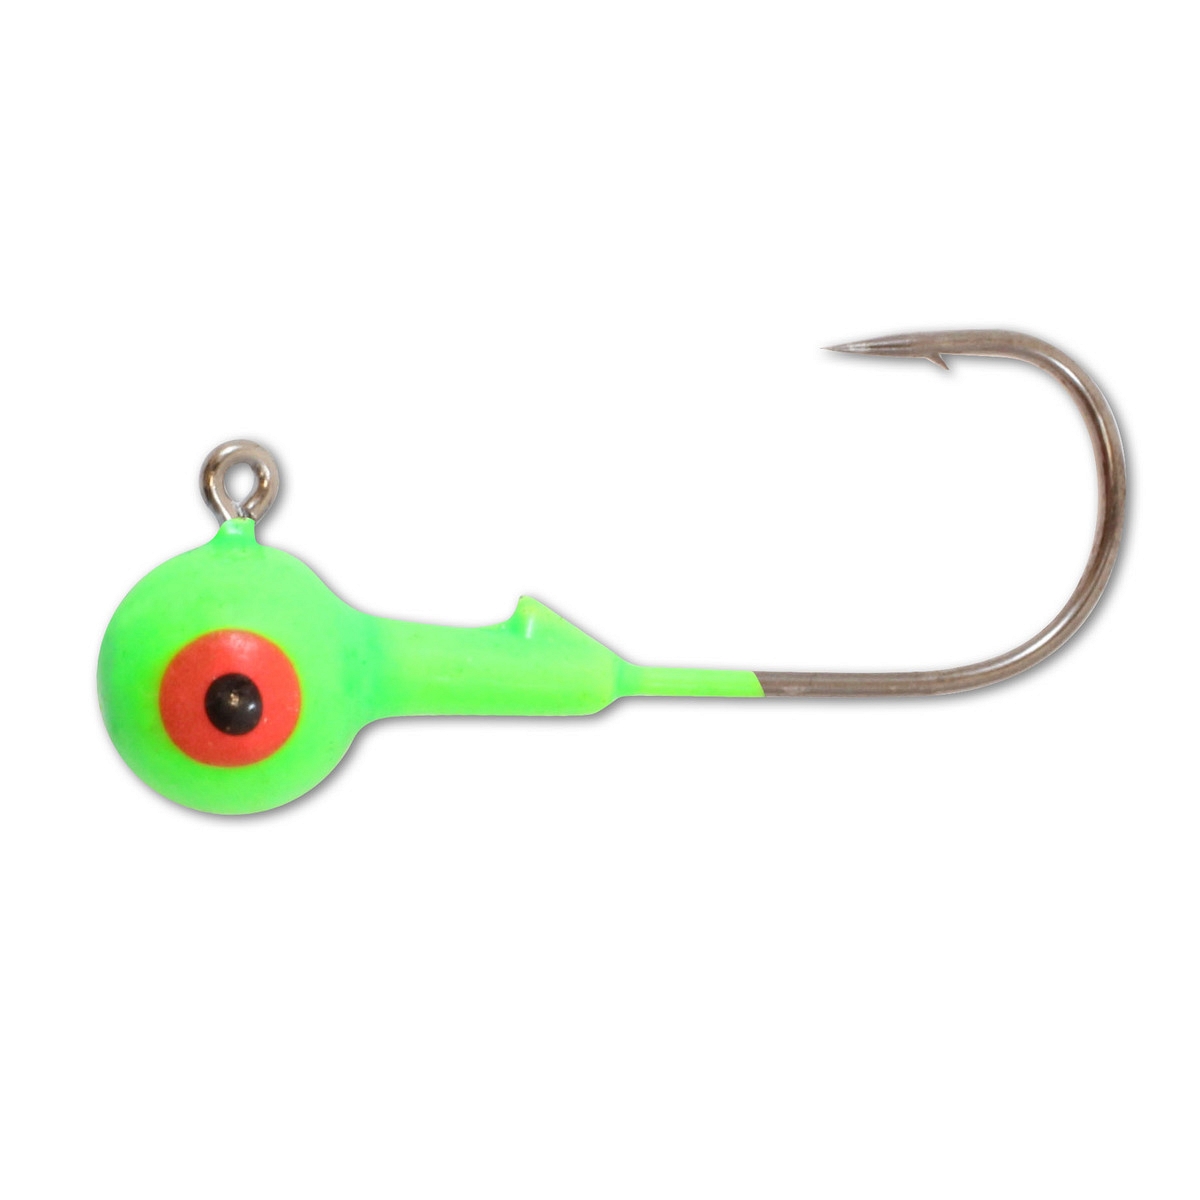 Northland RZ Jigs - Discount Fishing Tackle